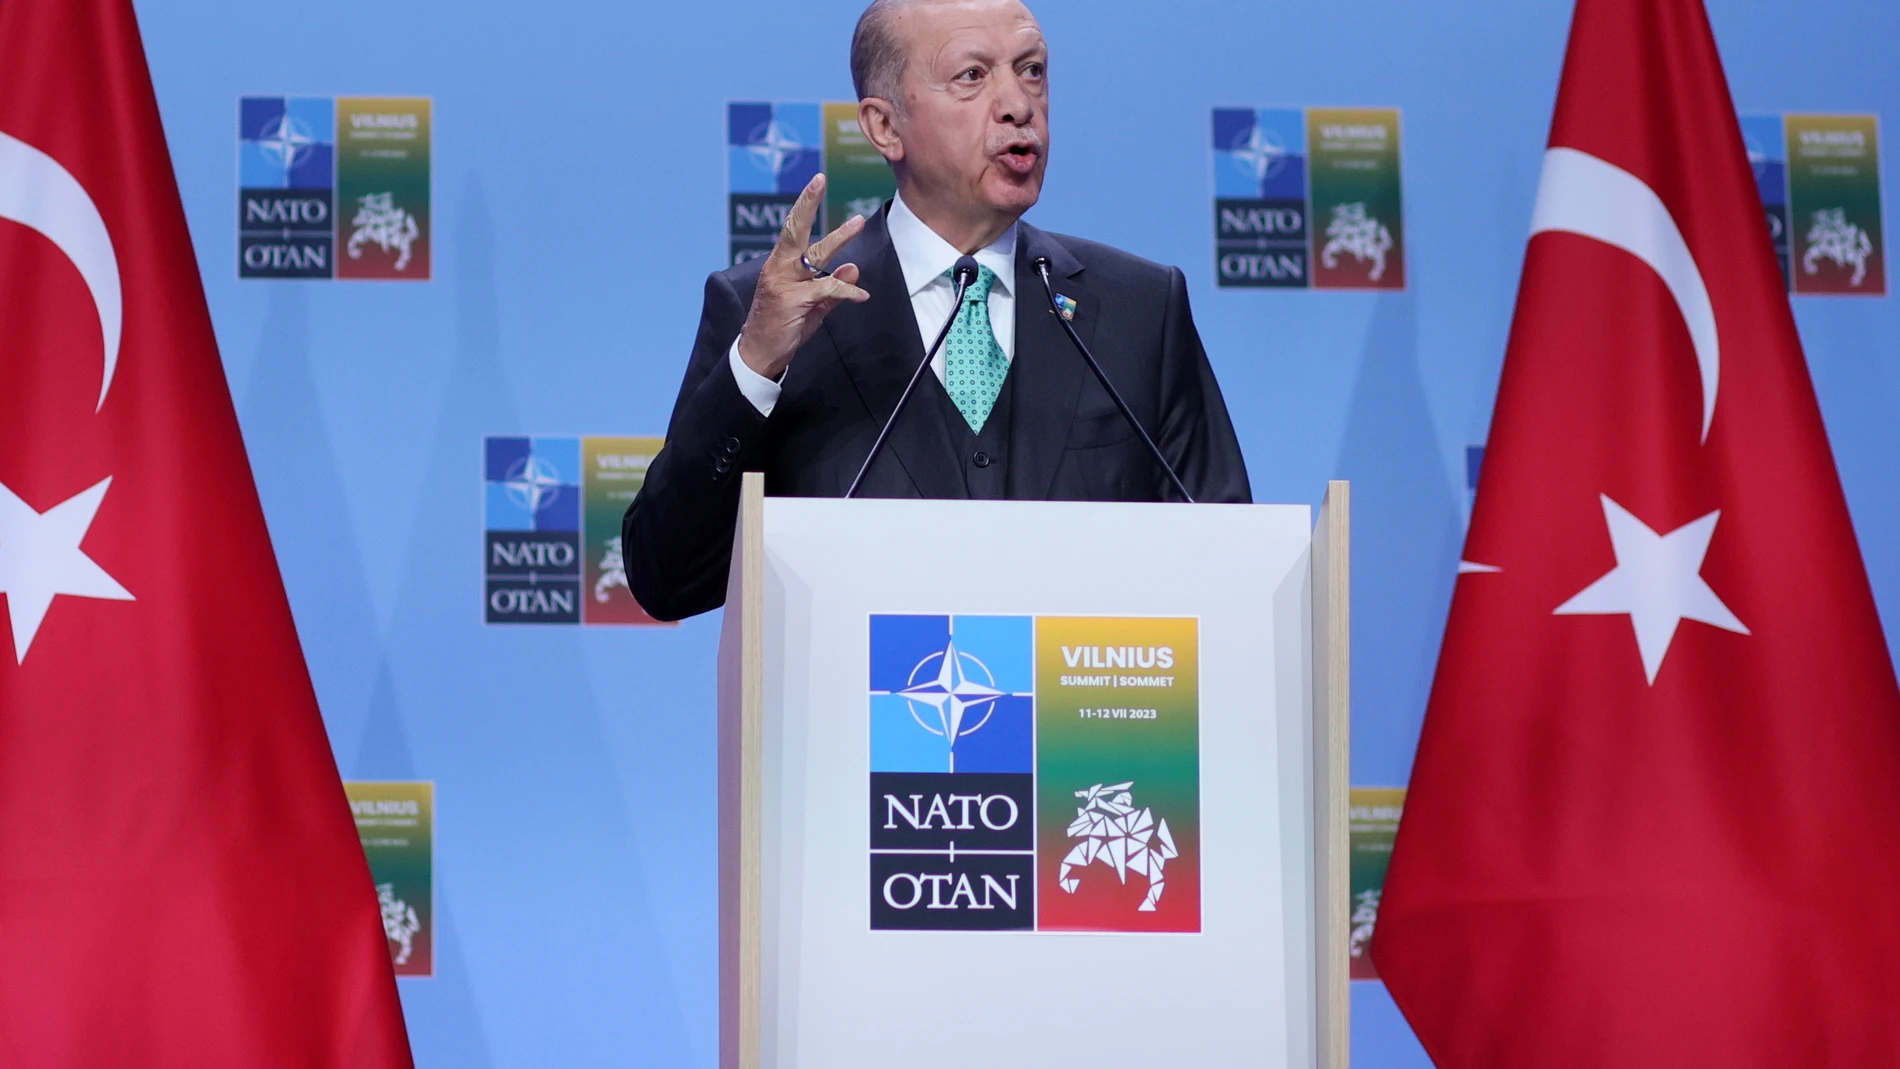 Vilnius (Lithuania), 12/07/2023.- President of Turkey Recep Tayyip Erdogan attends a press conference during the NATO ?summit in Vilnius, Lithuania, 12 July 2023. The North Atlantic Treaty Organization (NATO) Summit takes place in Vilnius on 11 and 12 July 2023 with the alliance's leaders expected to adopt new defense plans. (Lituania, Turquía) EFE/EPA/TIM IRELAND